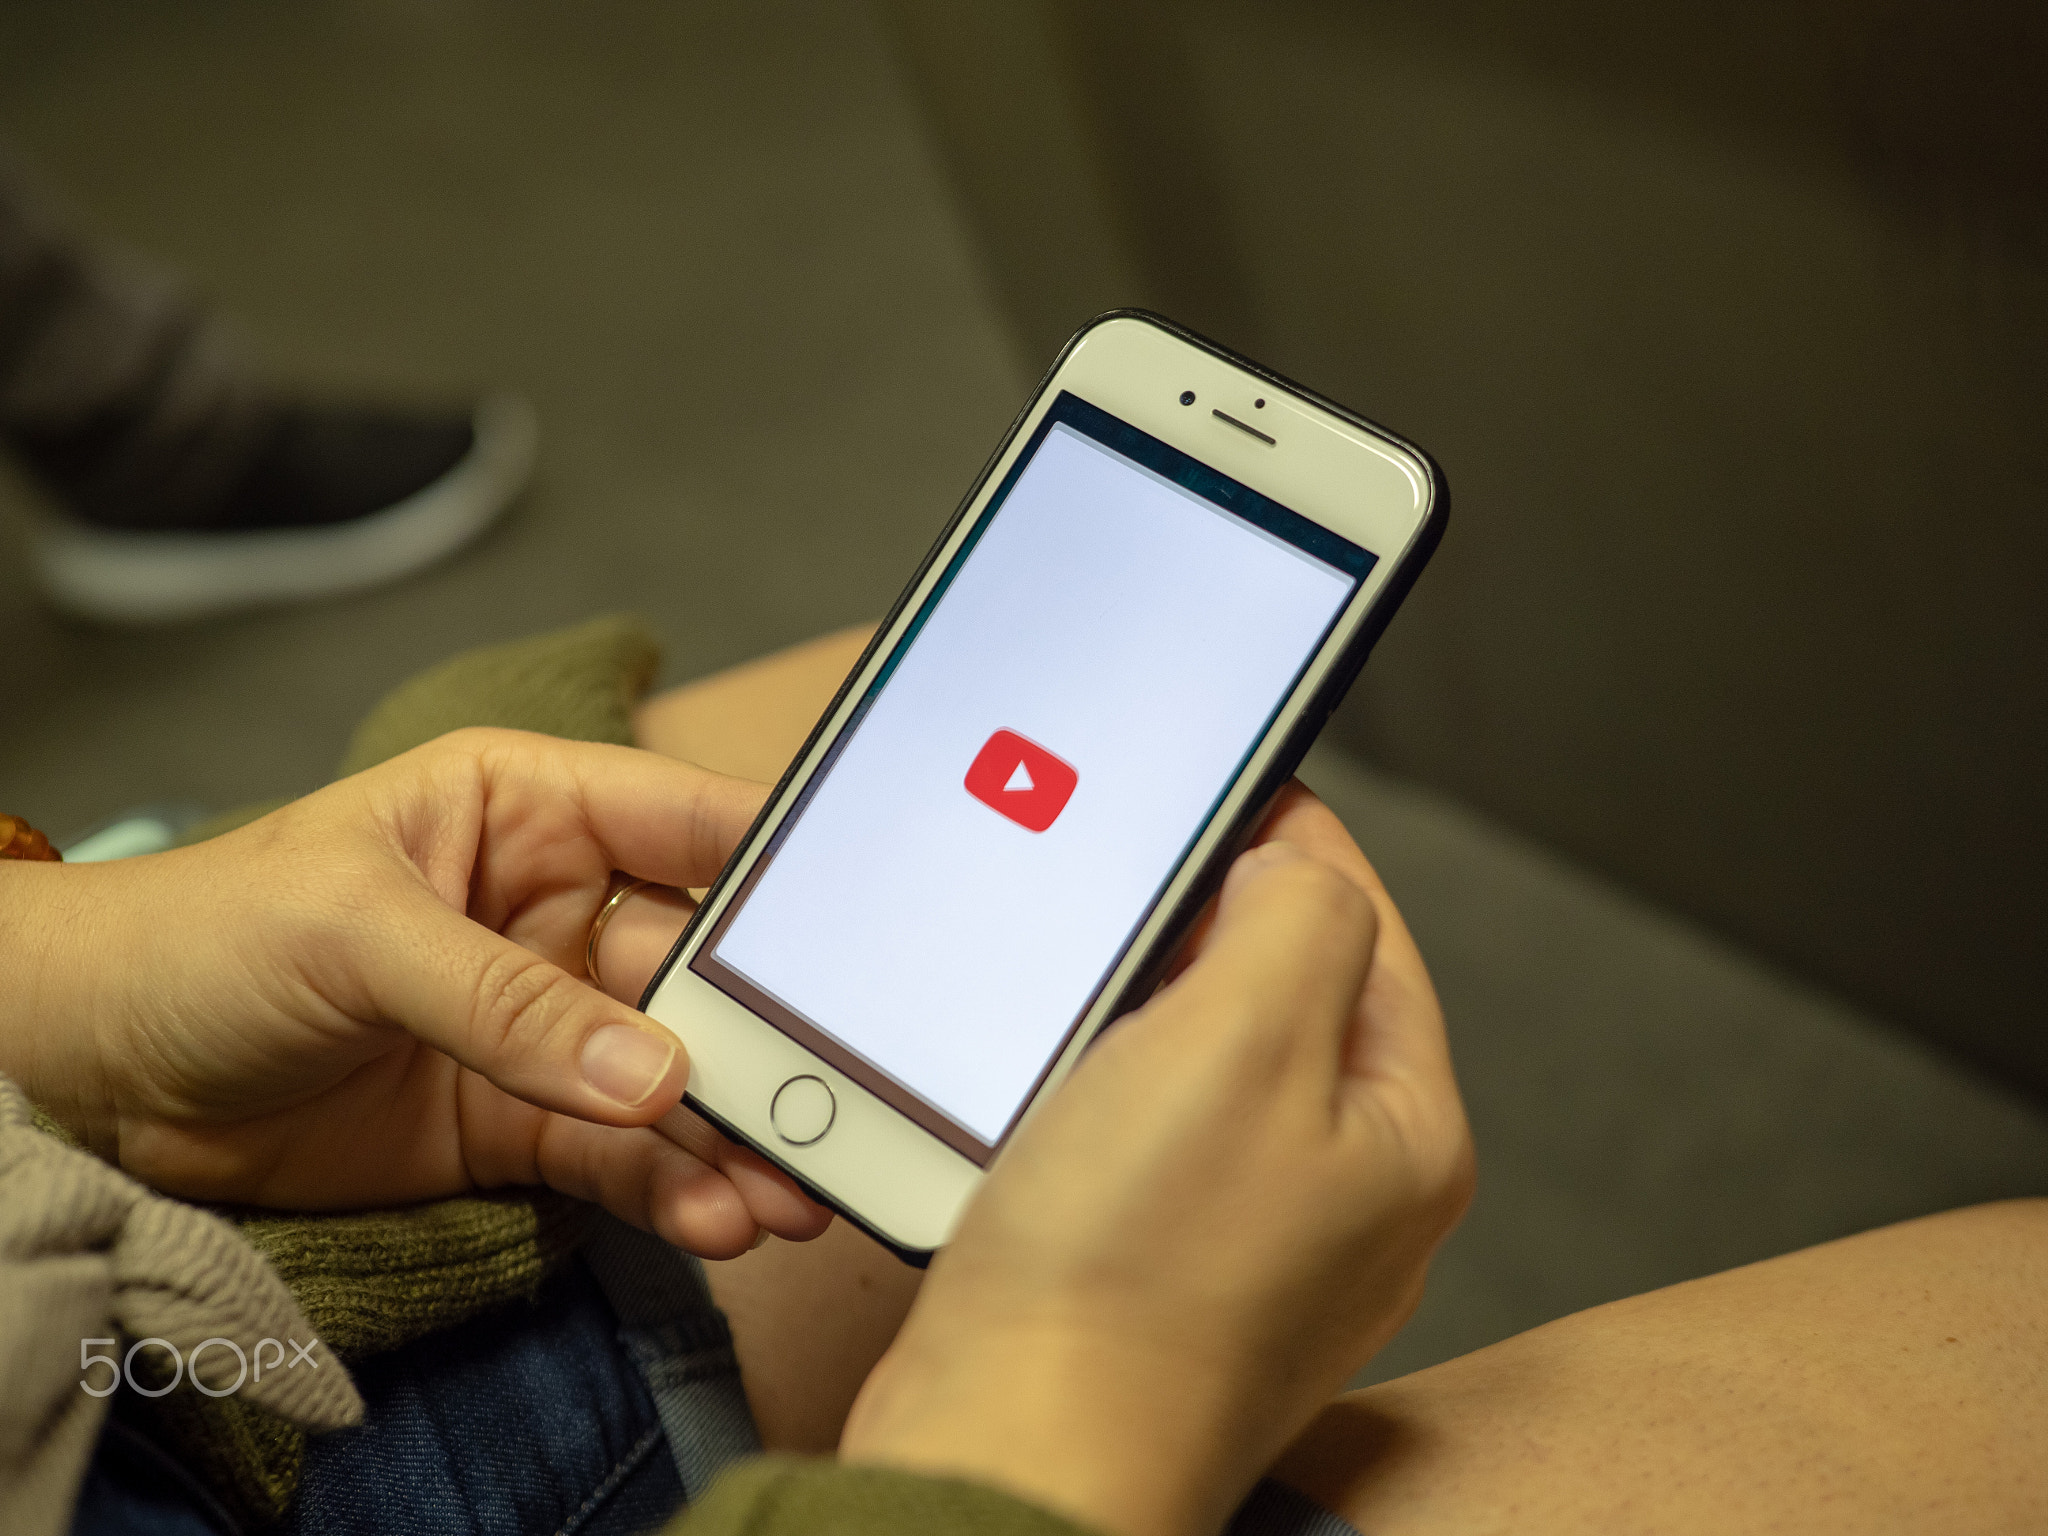 Woman opening YouTube mobile app with logo on iPhone screen while commuting on subway train